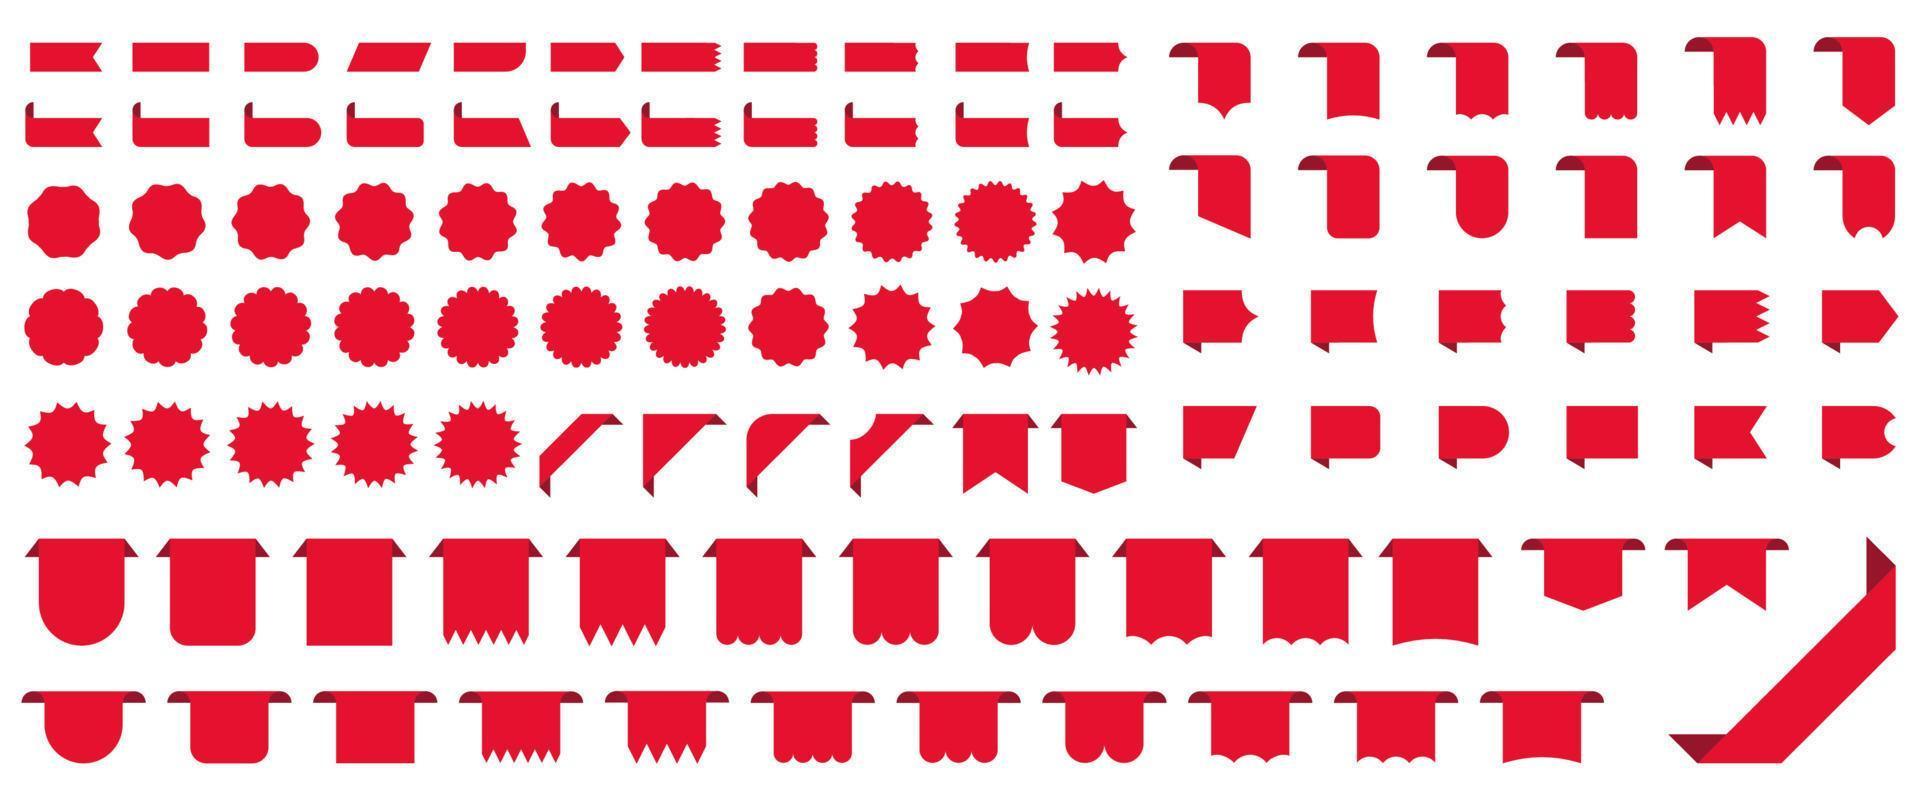 Sale price tag icon set collection. vector